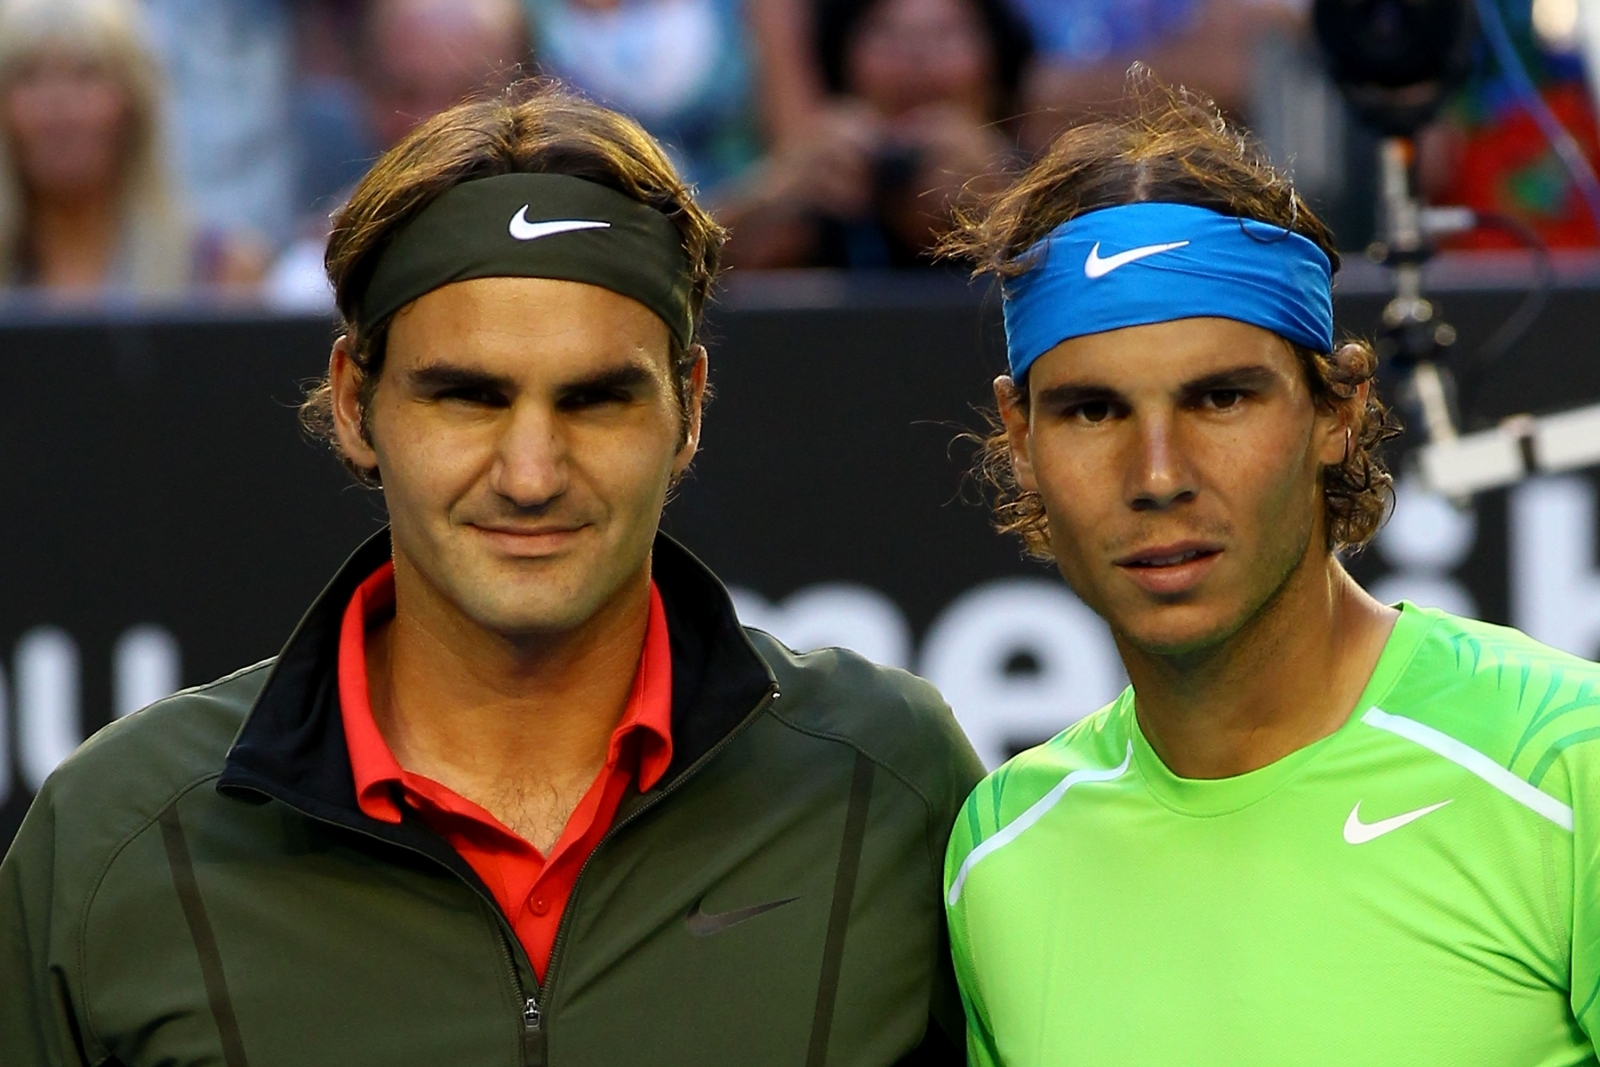 'To my rival Rafa': Federer pays tribute to Nadal after revealing ...